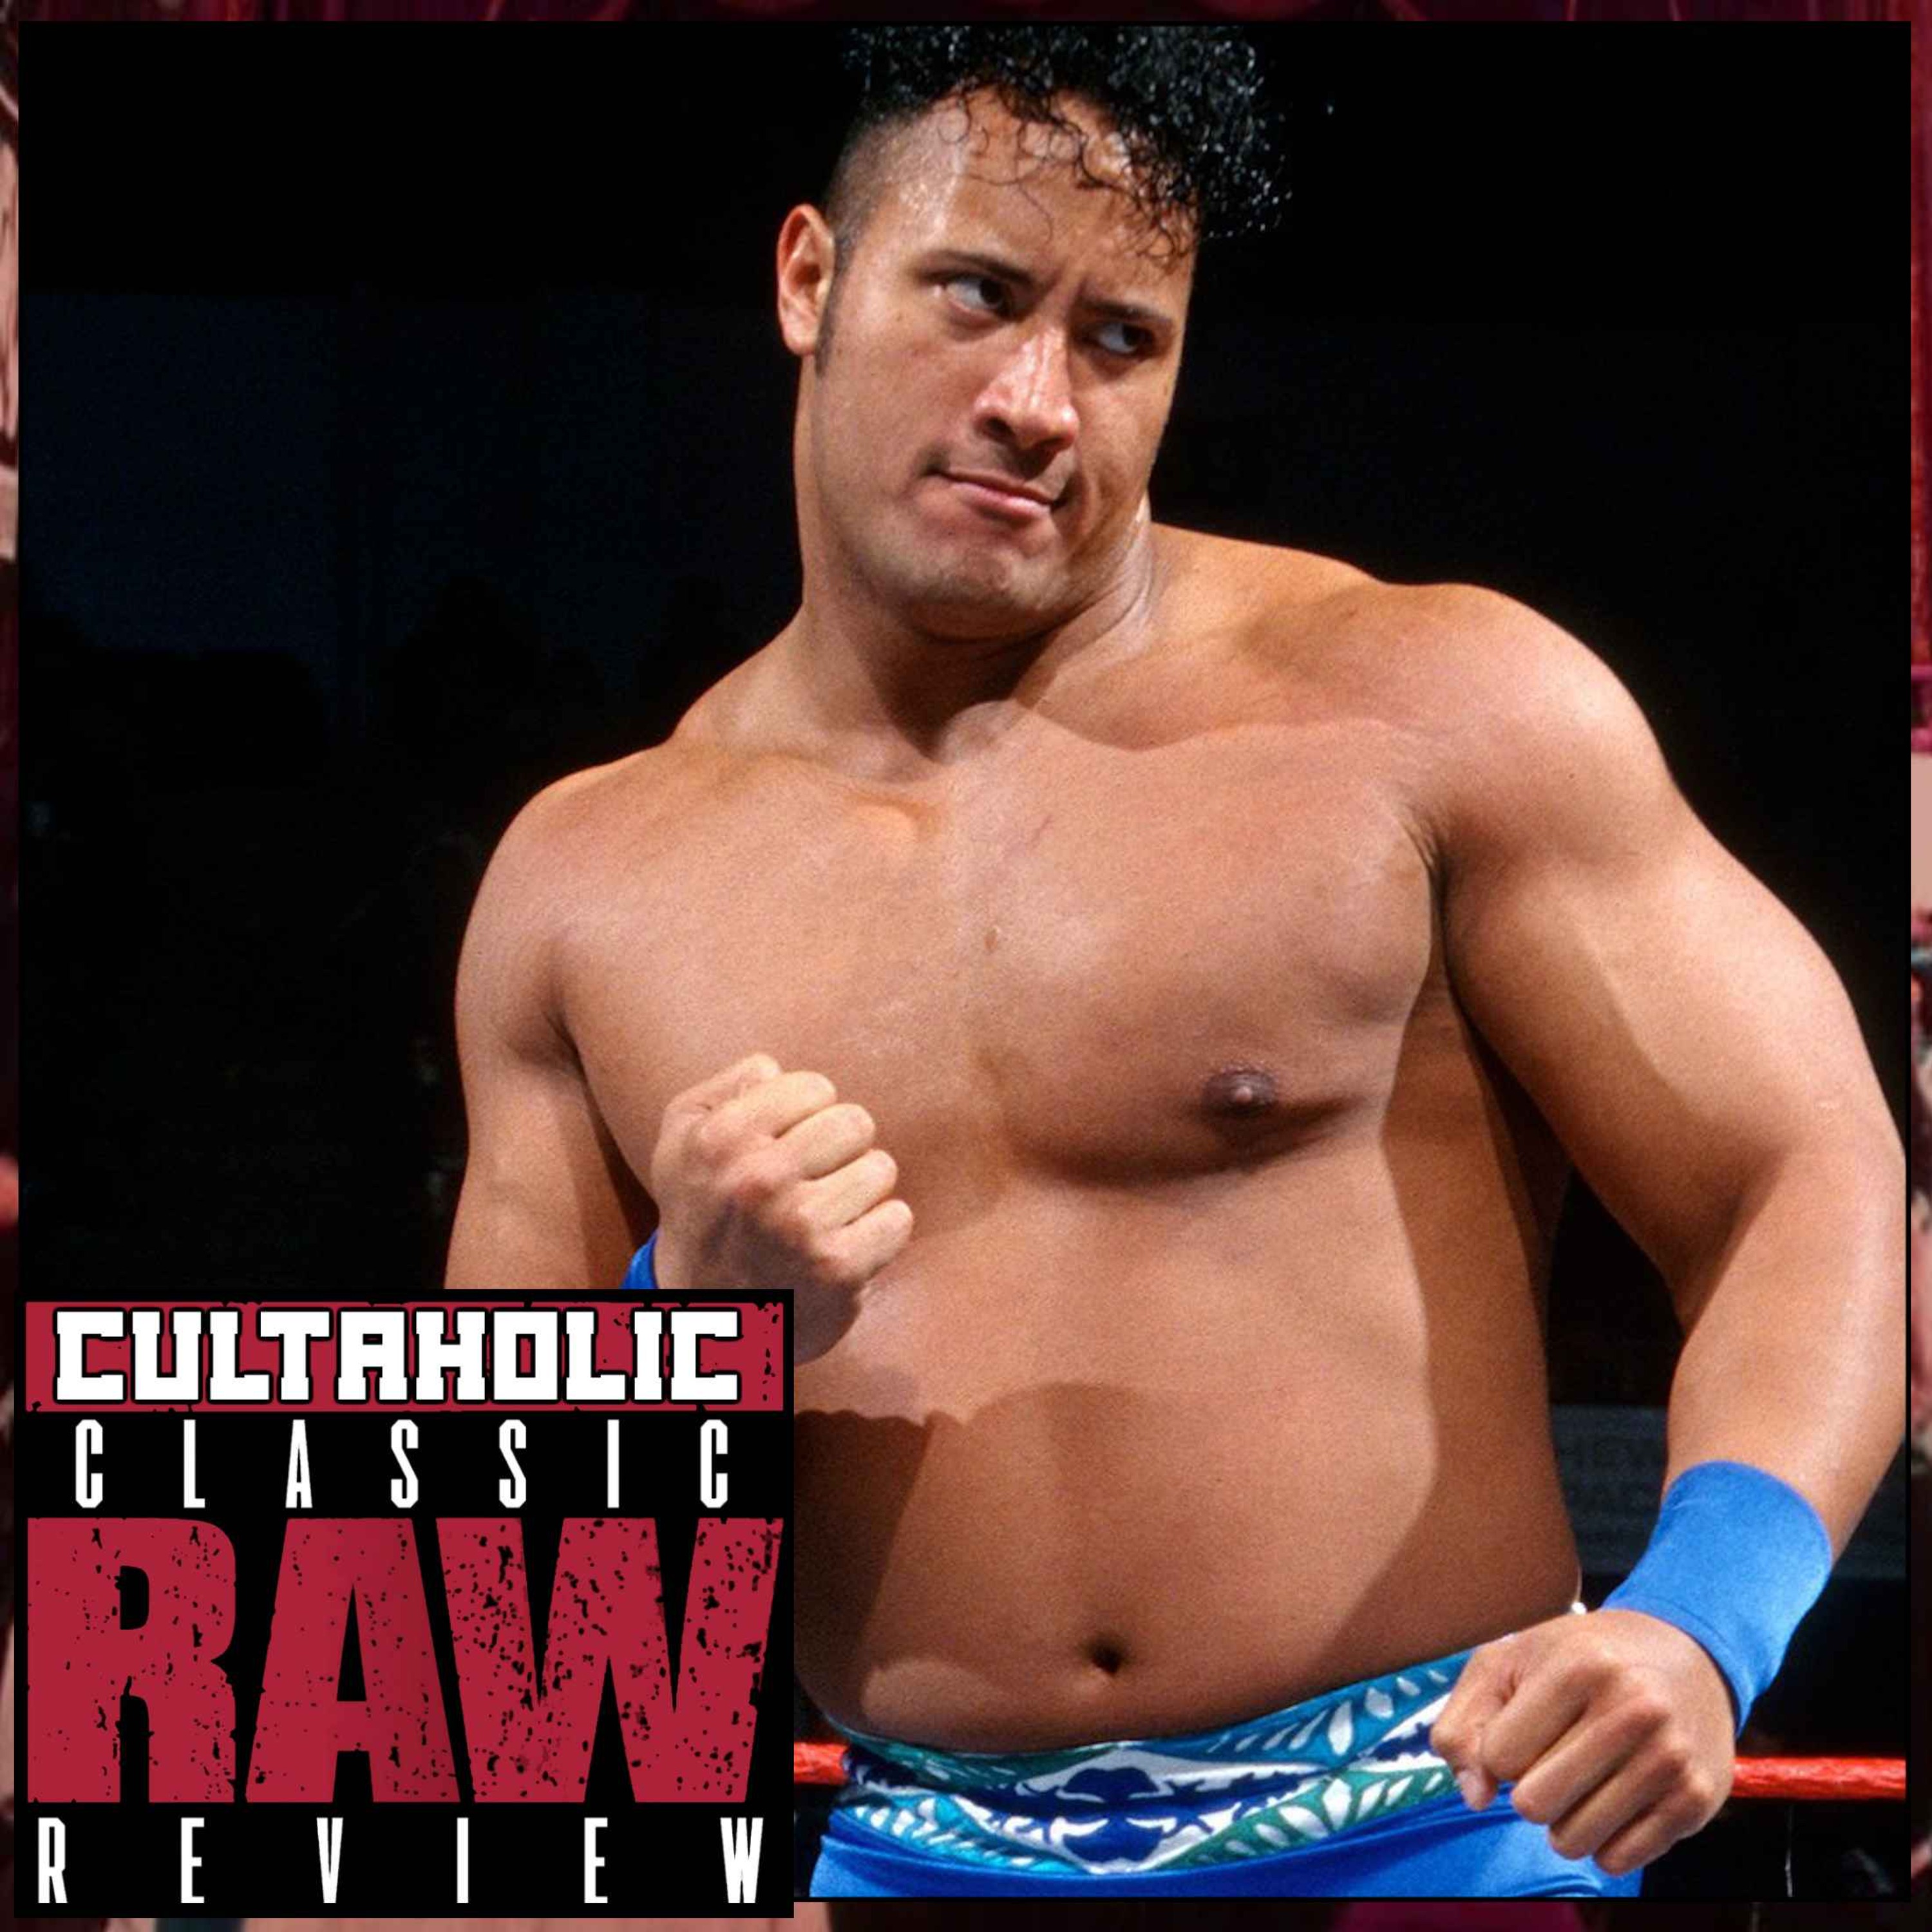 WWE Raw #186: The Rock Starts Cookin' - Rocky Maivia's In-Ring TV Debut!